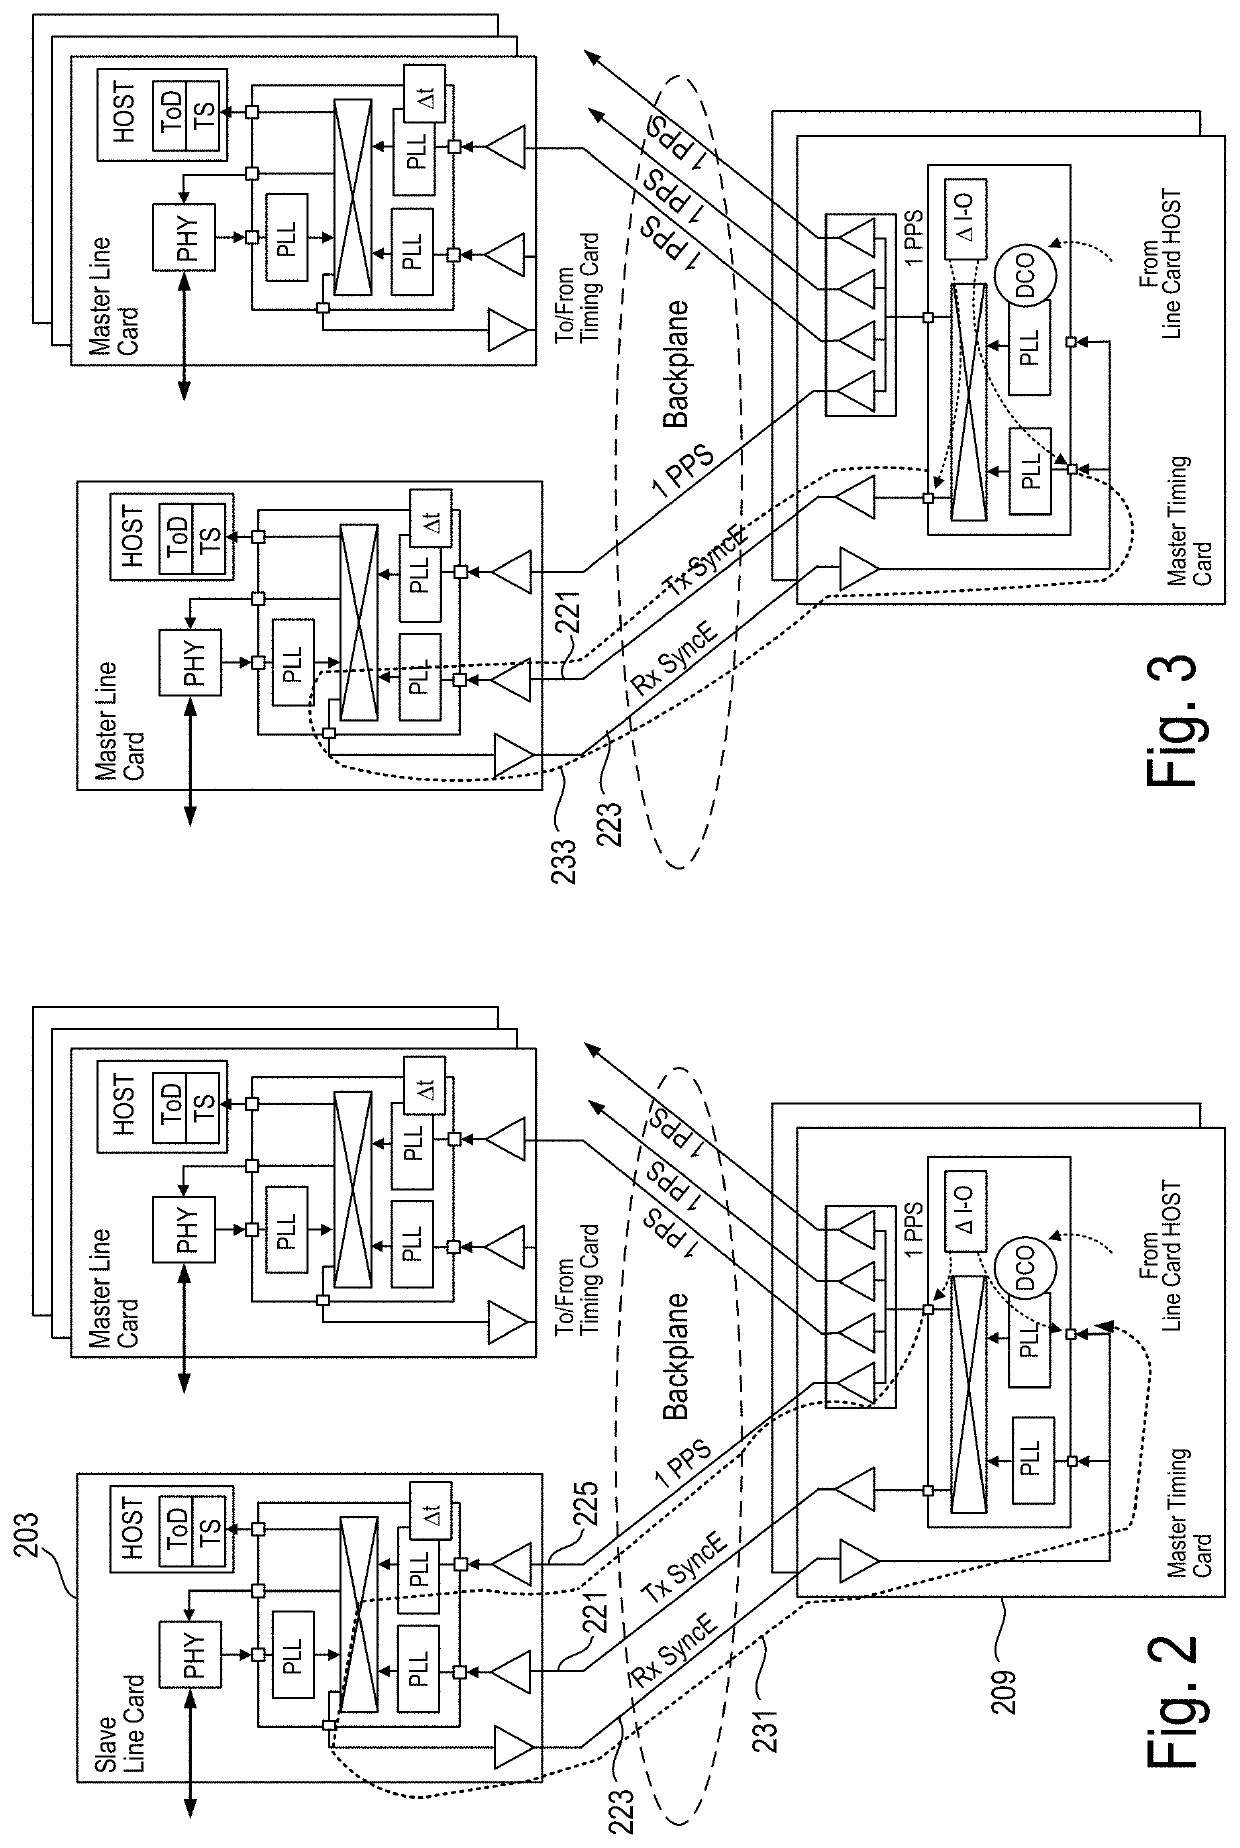 Synchronizing Update of Time of Day Counters Using Time Stamp Exchange Over A Control Plane